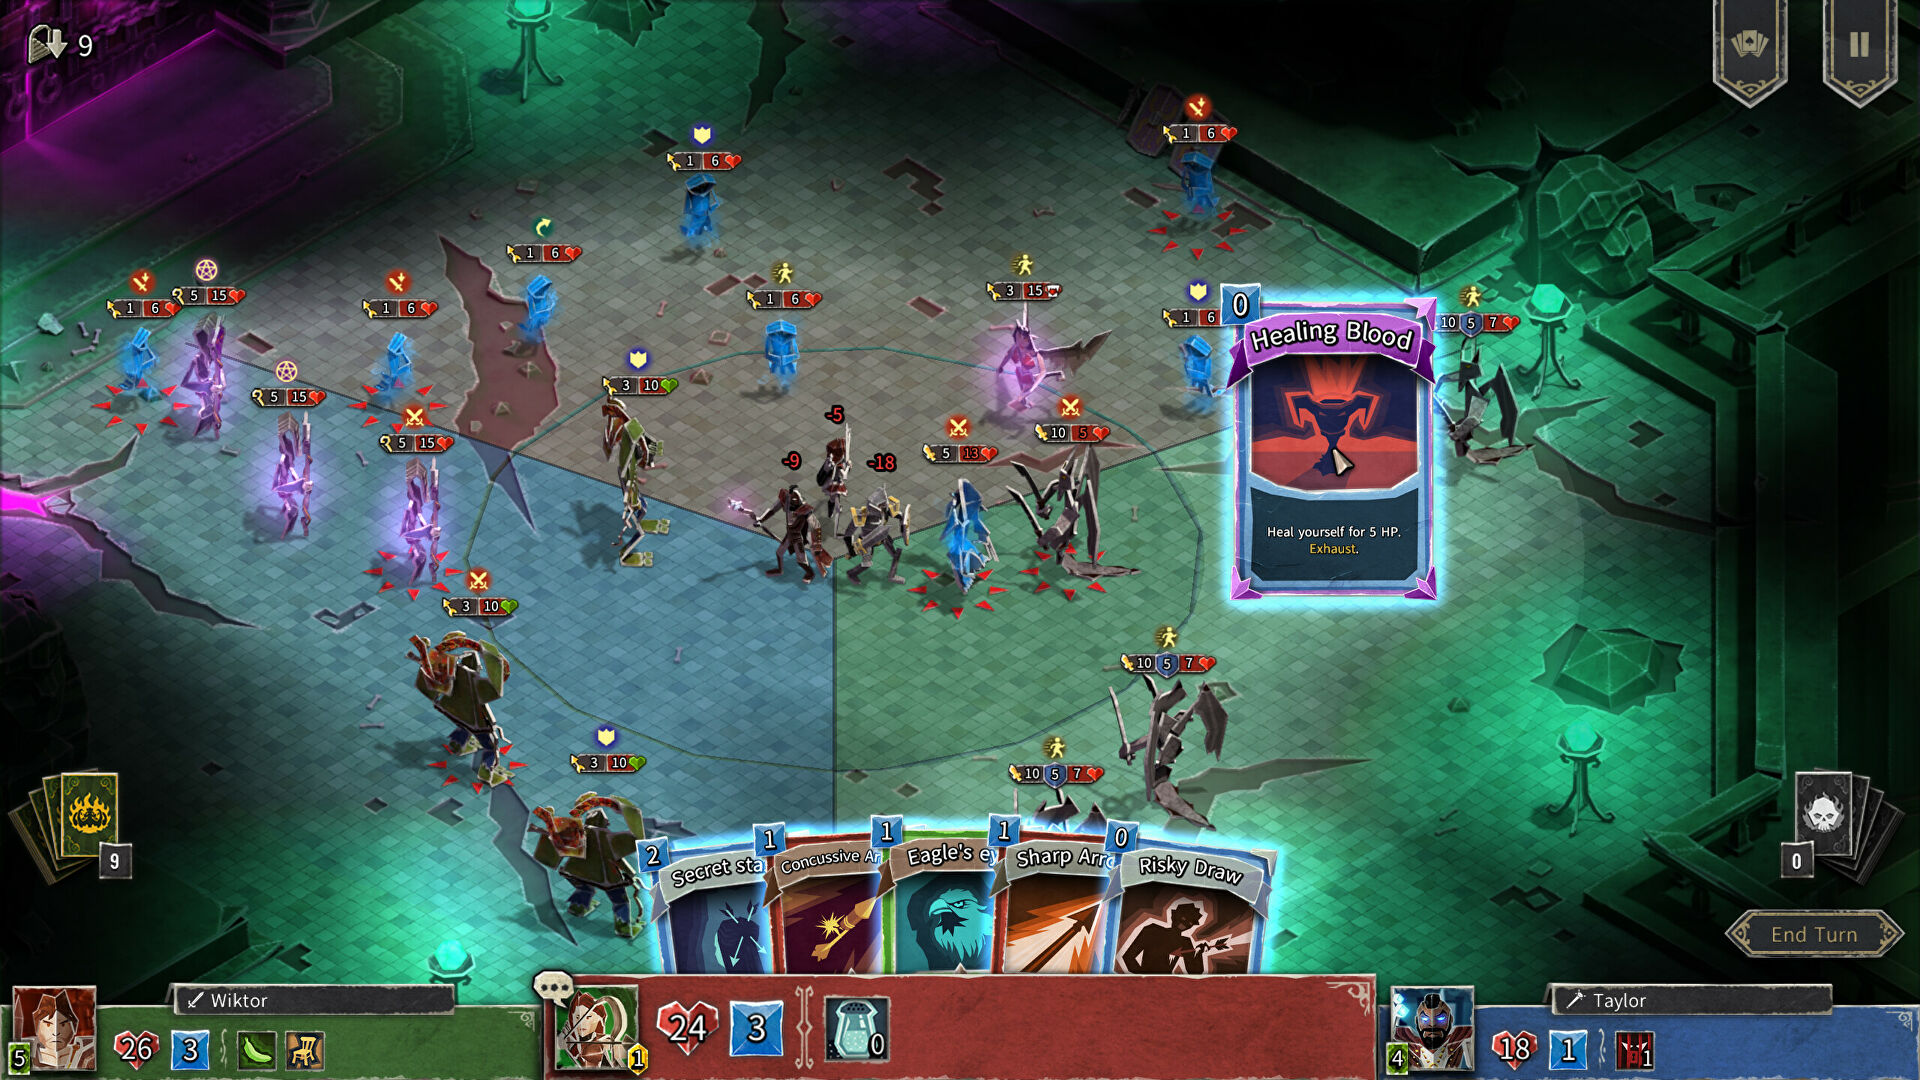 Book Of Demons continues its papercraft Diablo tribute with new roguelike deckbuilder